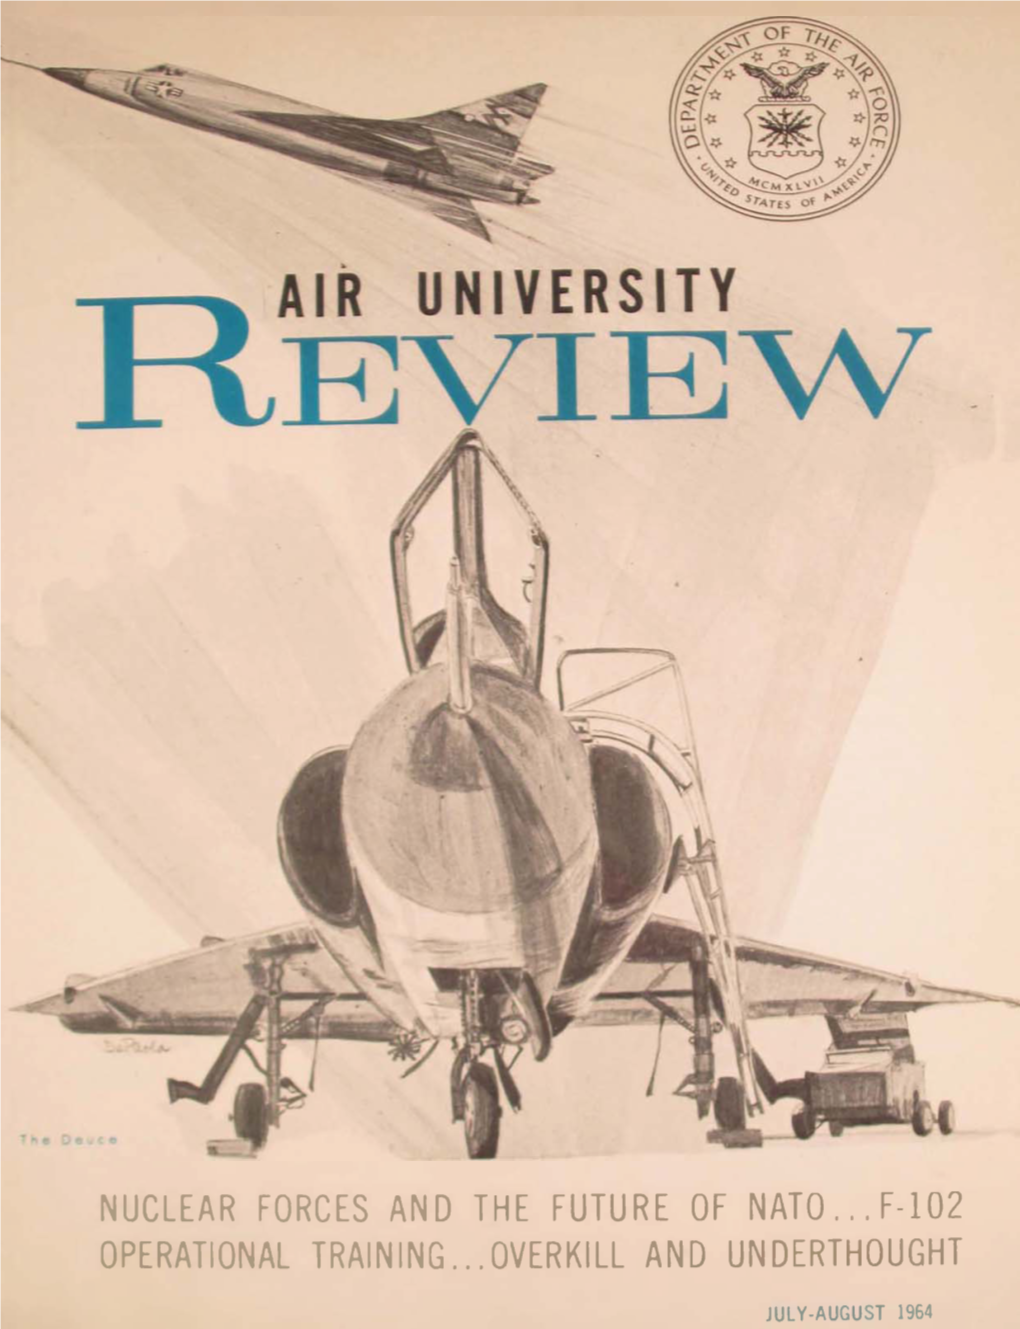 Air University Review: July-August 1964, Vol XV, No. 5